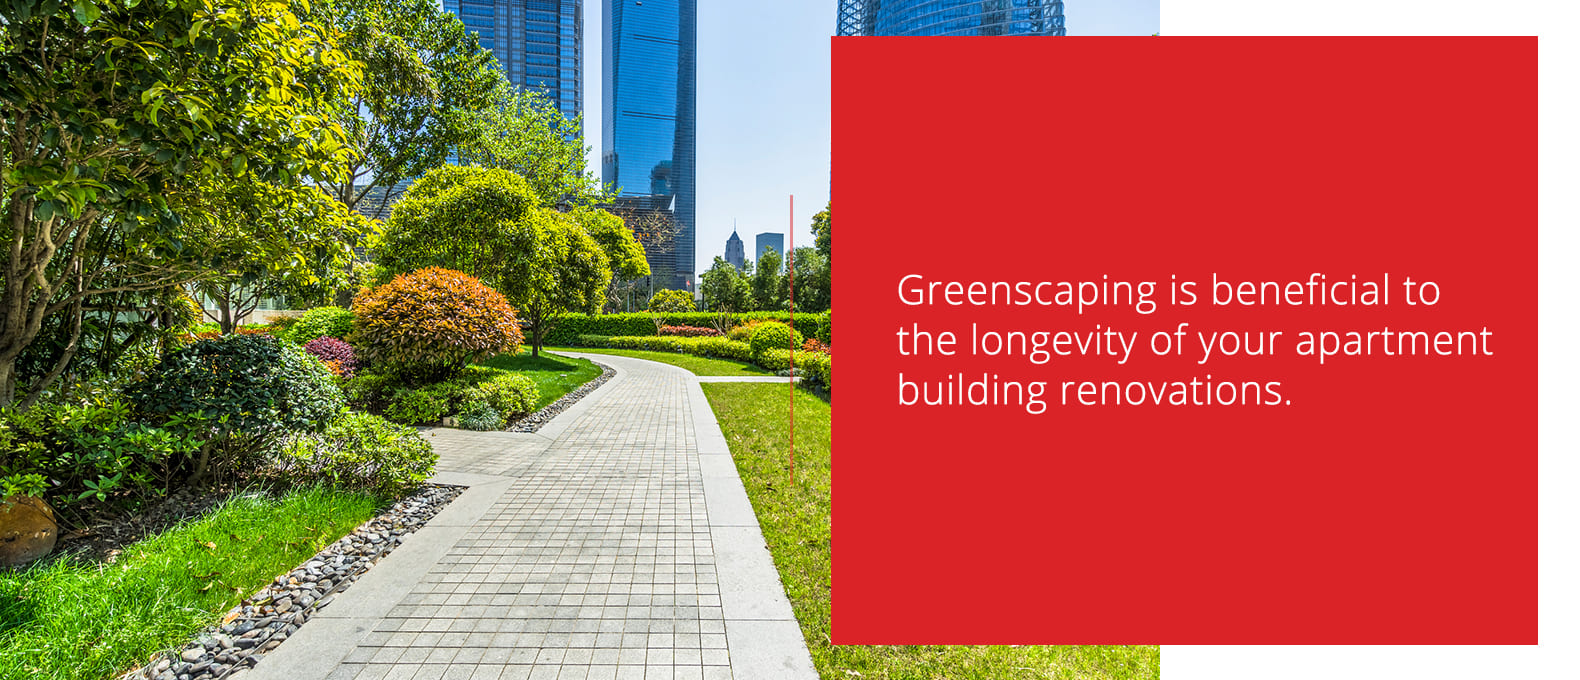 Greenscaping is beneficial to the longevity of your apartment building renovations